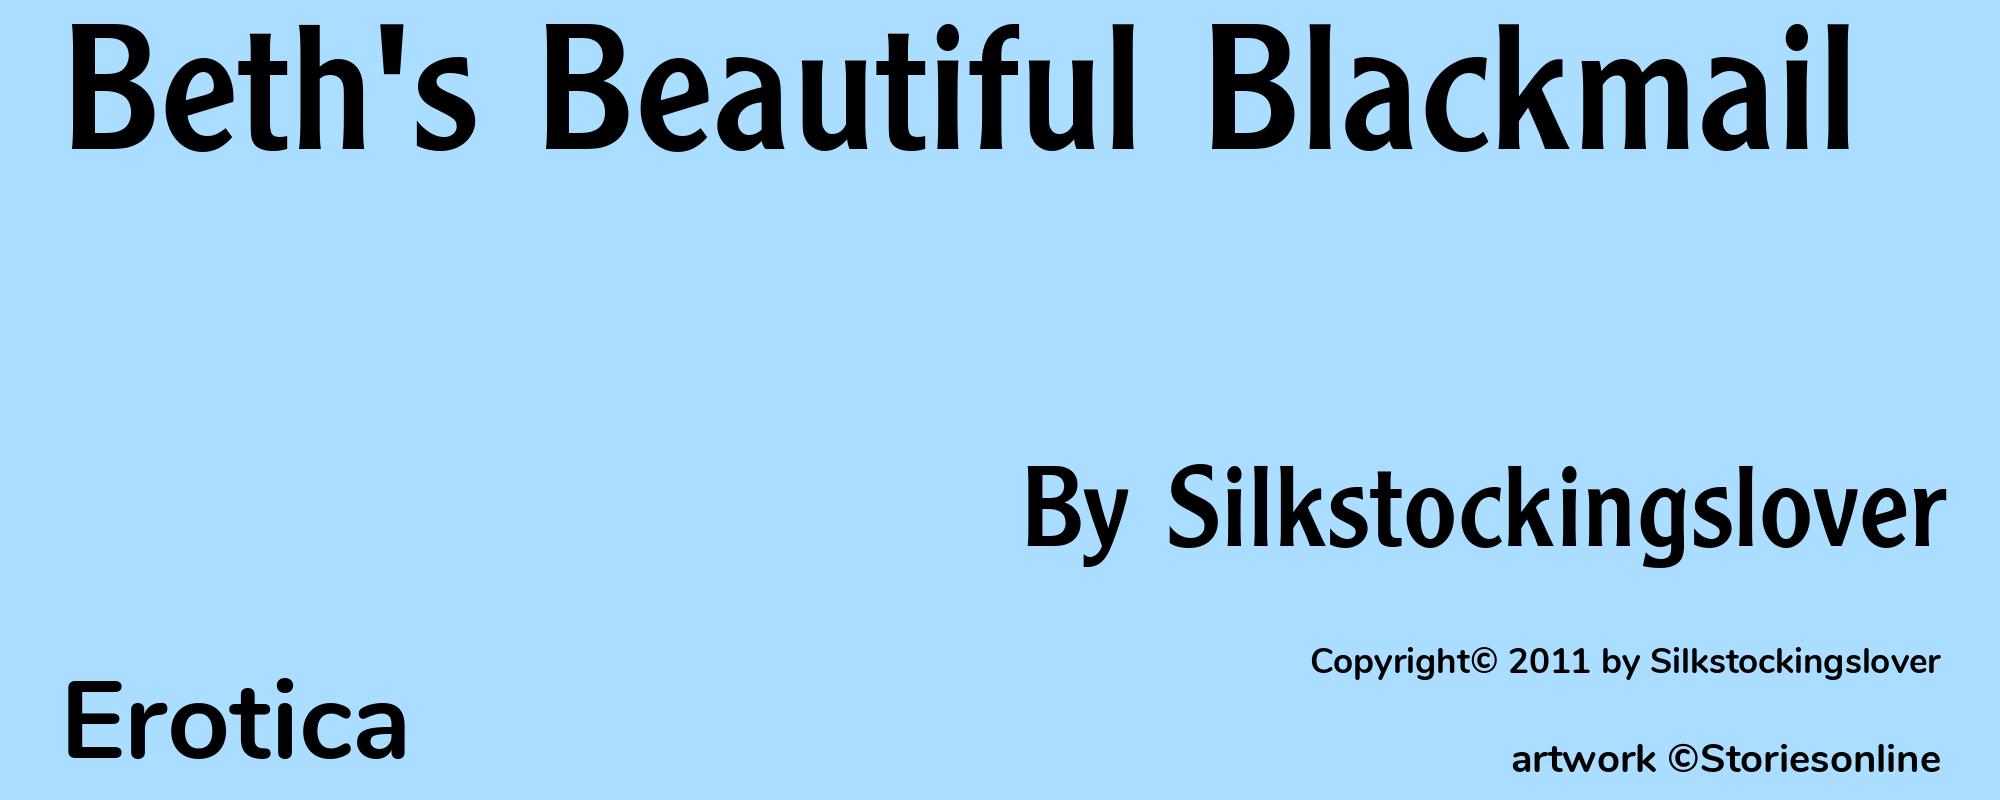 Beth's Beautiful Blackmail - Cover